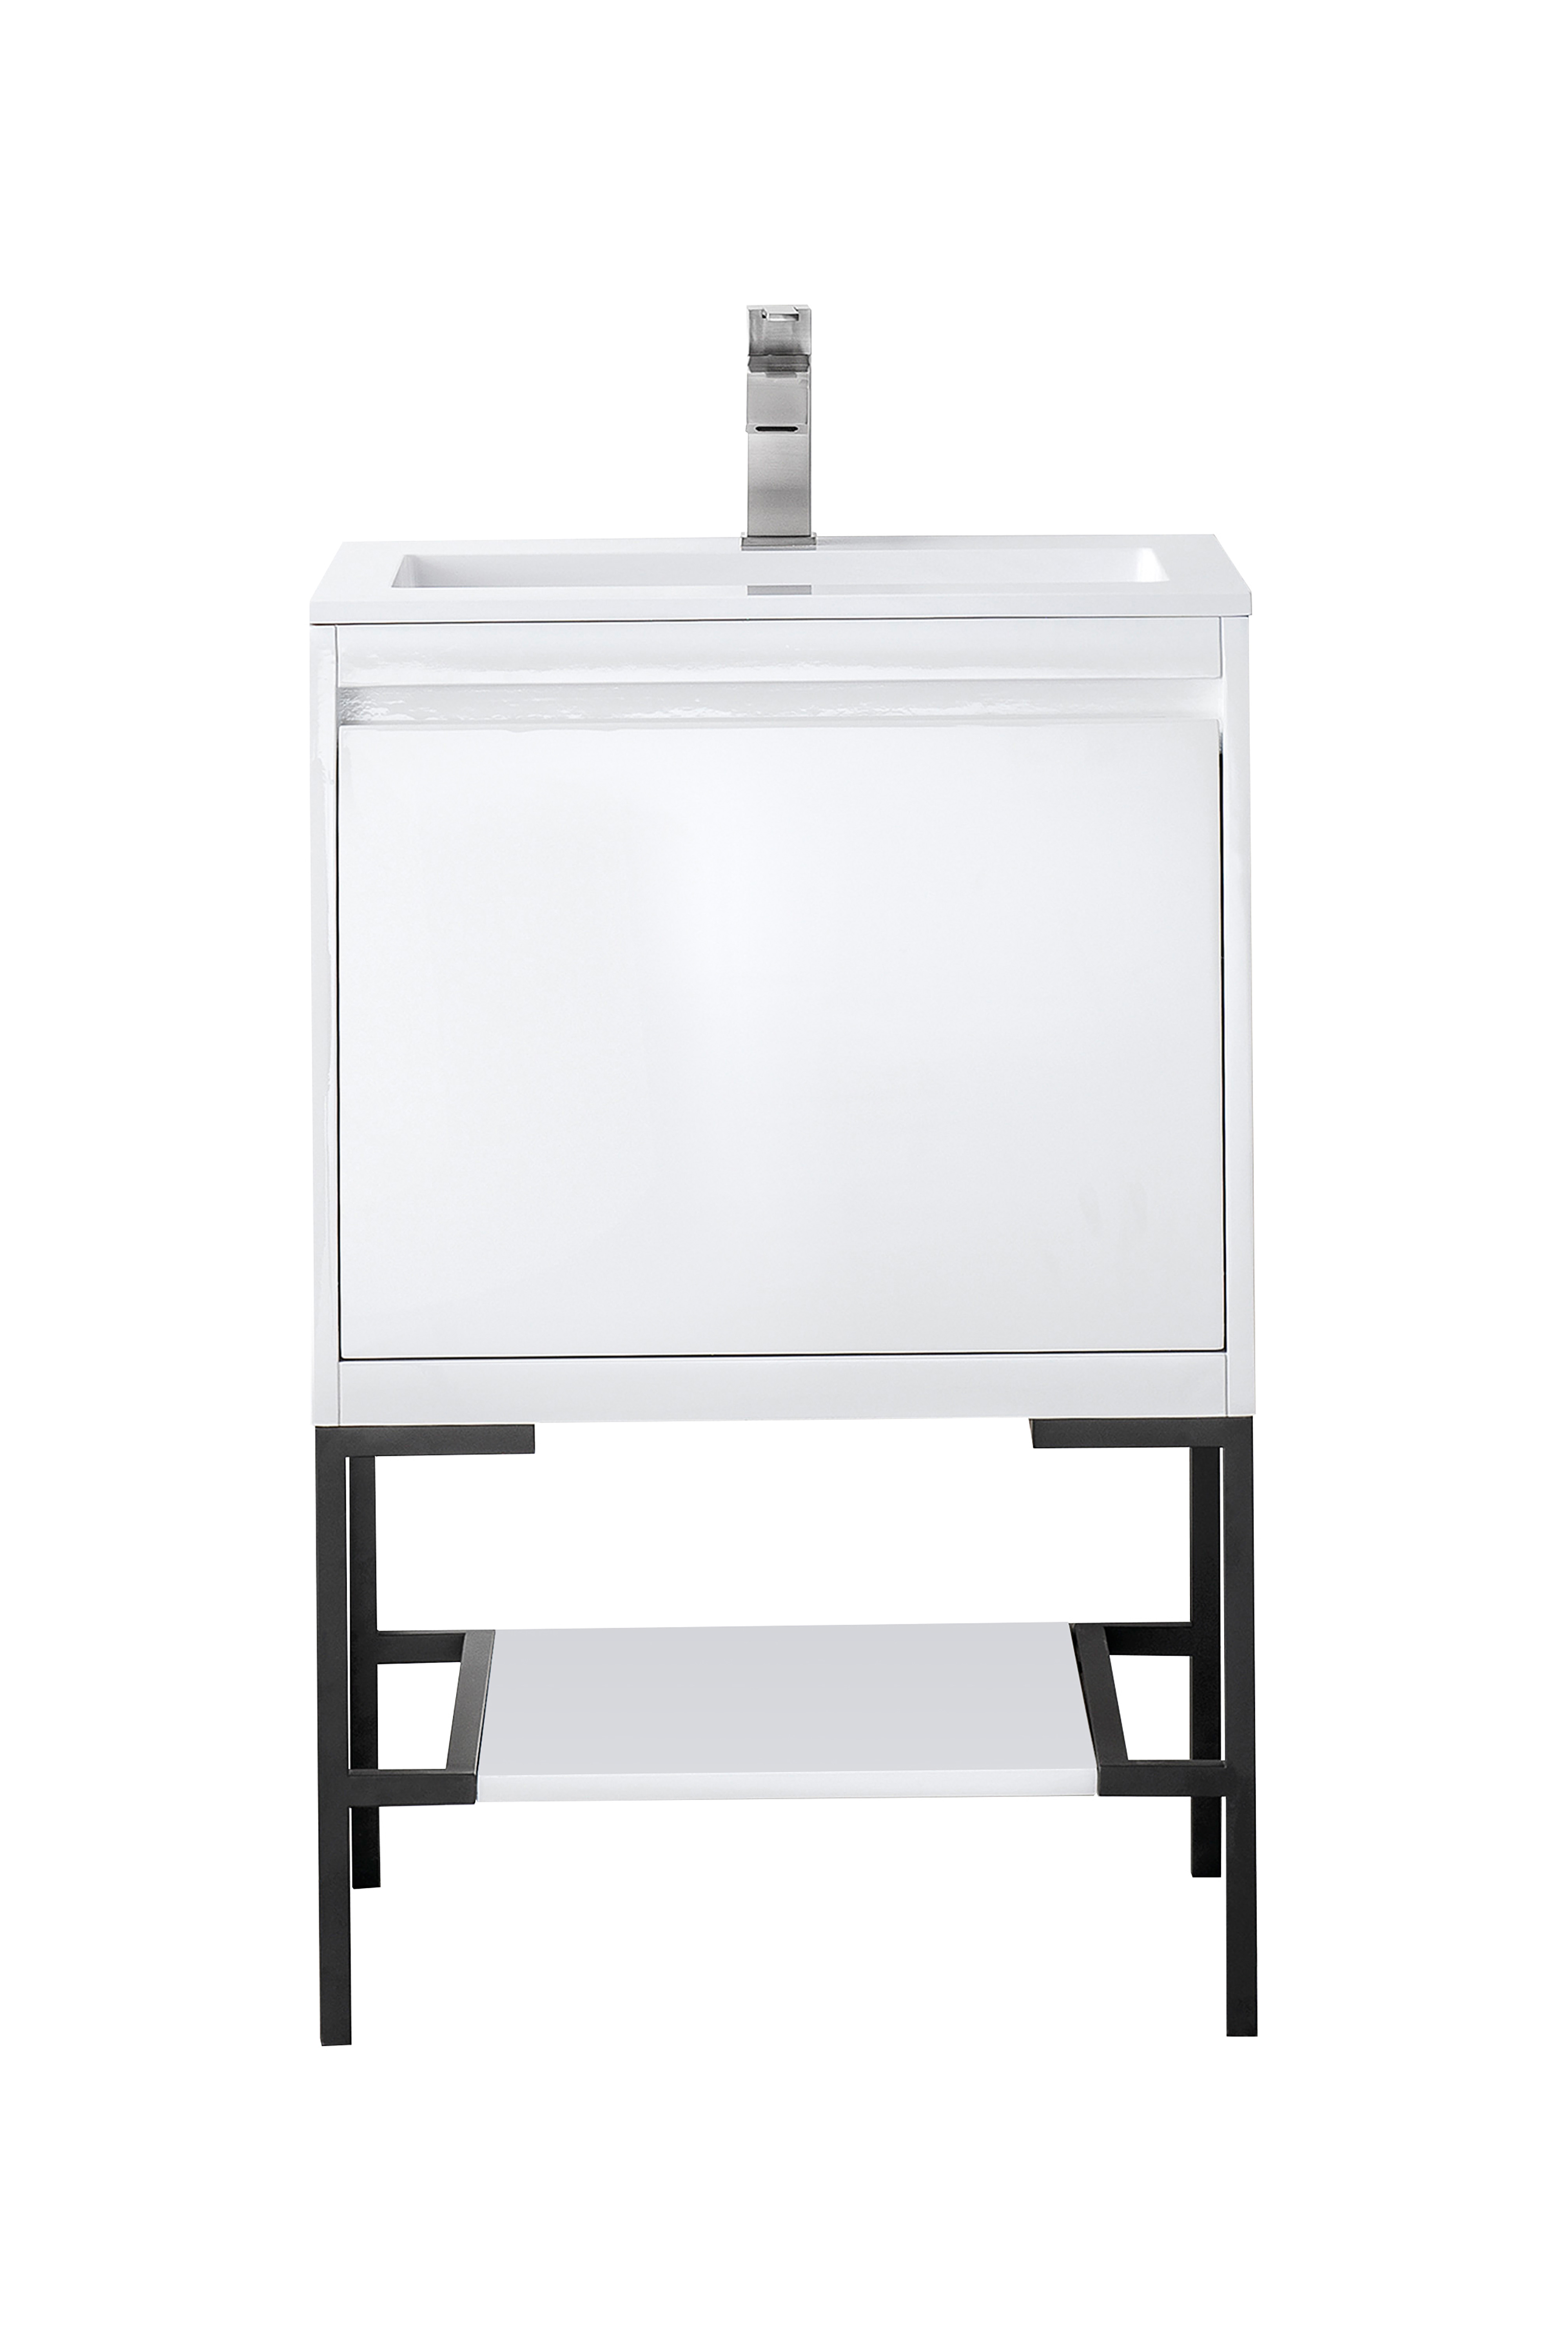 James Martin 801V23.6GWMBKGW Milan 23.6" Single Vanity Cabinet, Glossy White, Matte Black w/Glossy White Composite Top - Click Image to Close